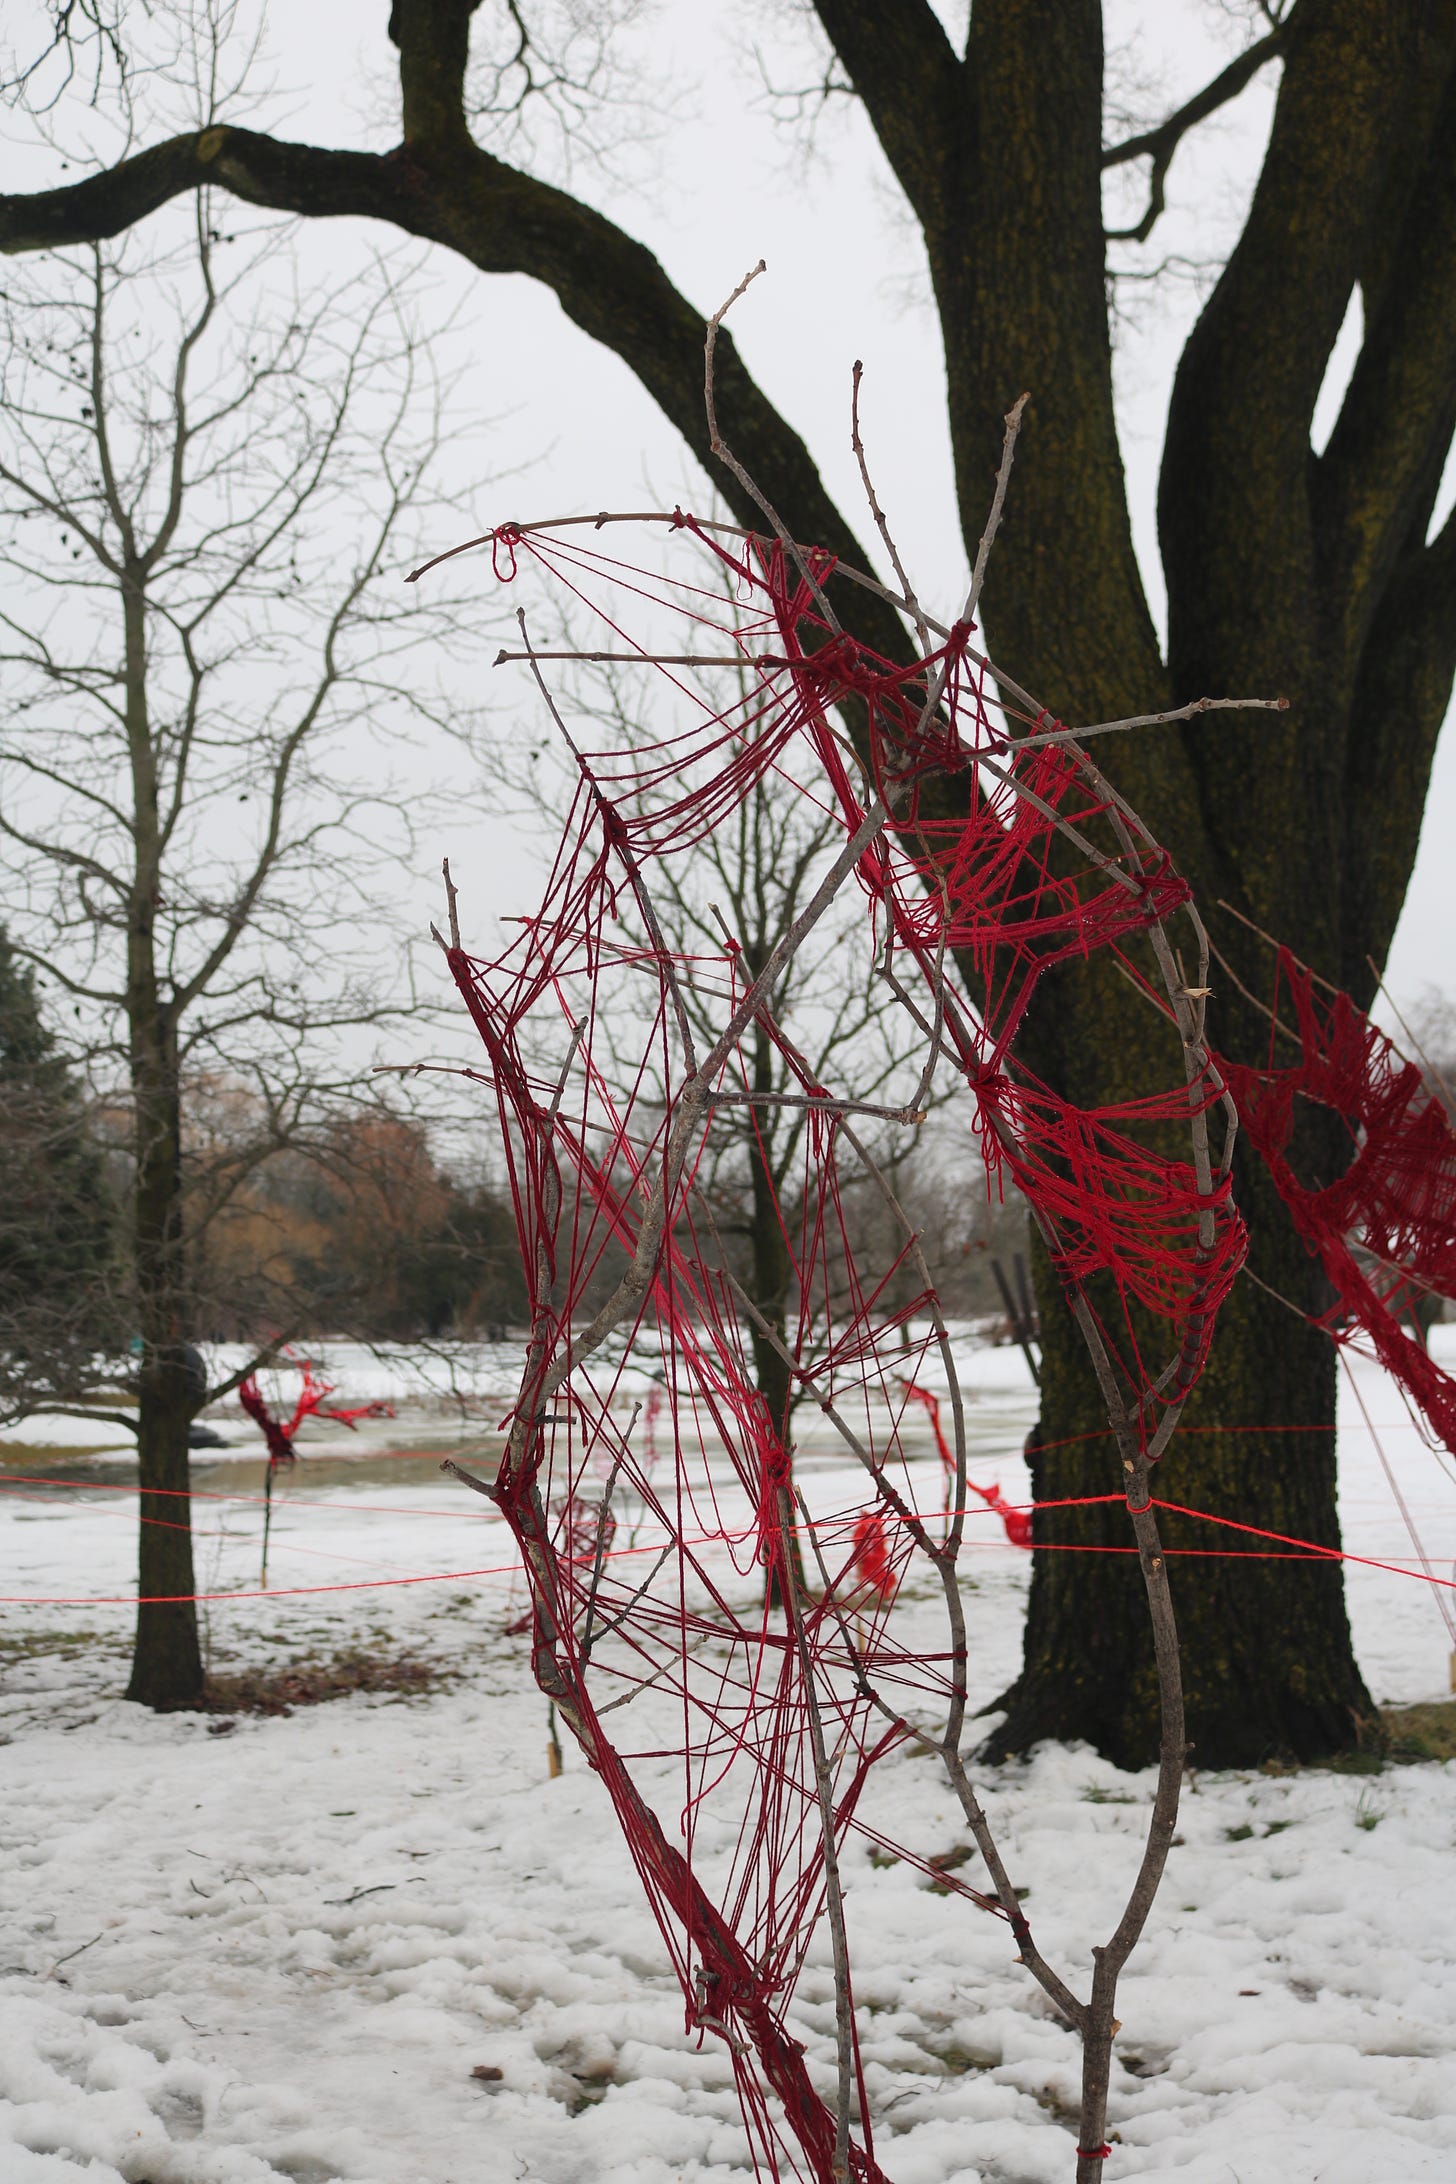 a close up of the installation. two of the scepters near each other creating a beautiful shape. the red pops against the dull grey of the scene.